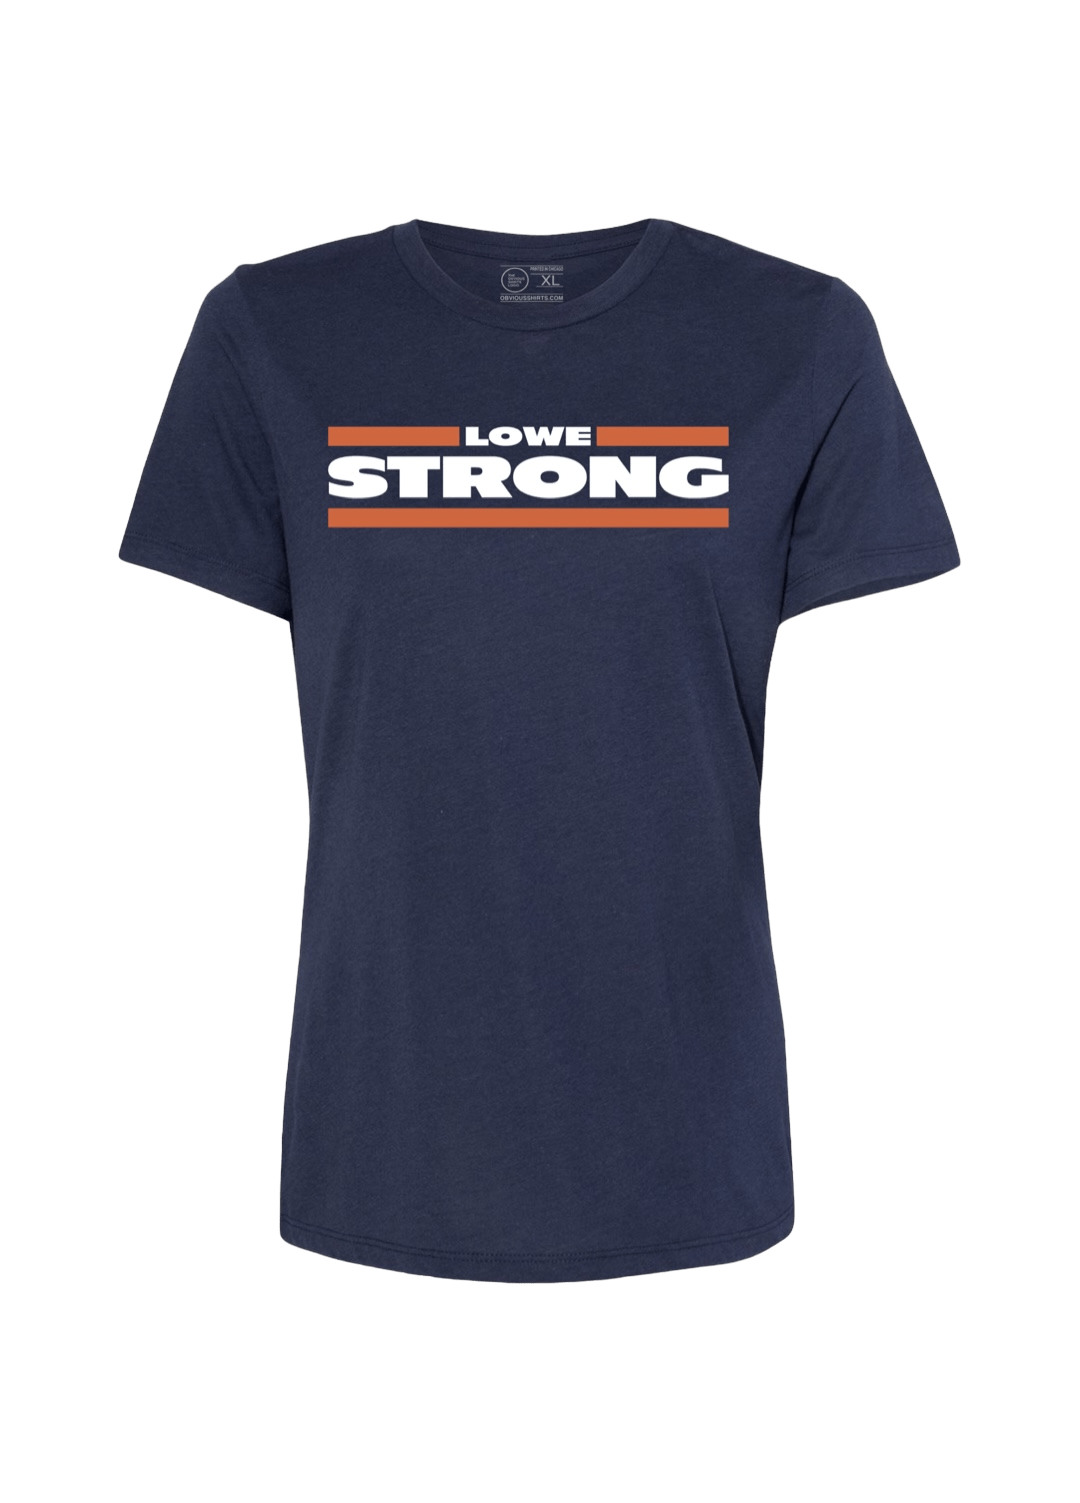 LOWE STRONG WOMEN'S CREW (100% DONATED) - OBVIOUS SHIRTS